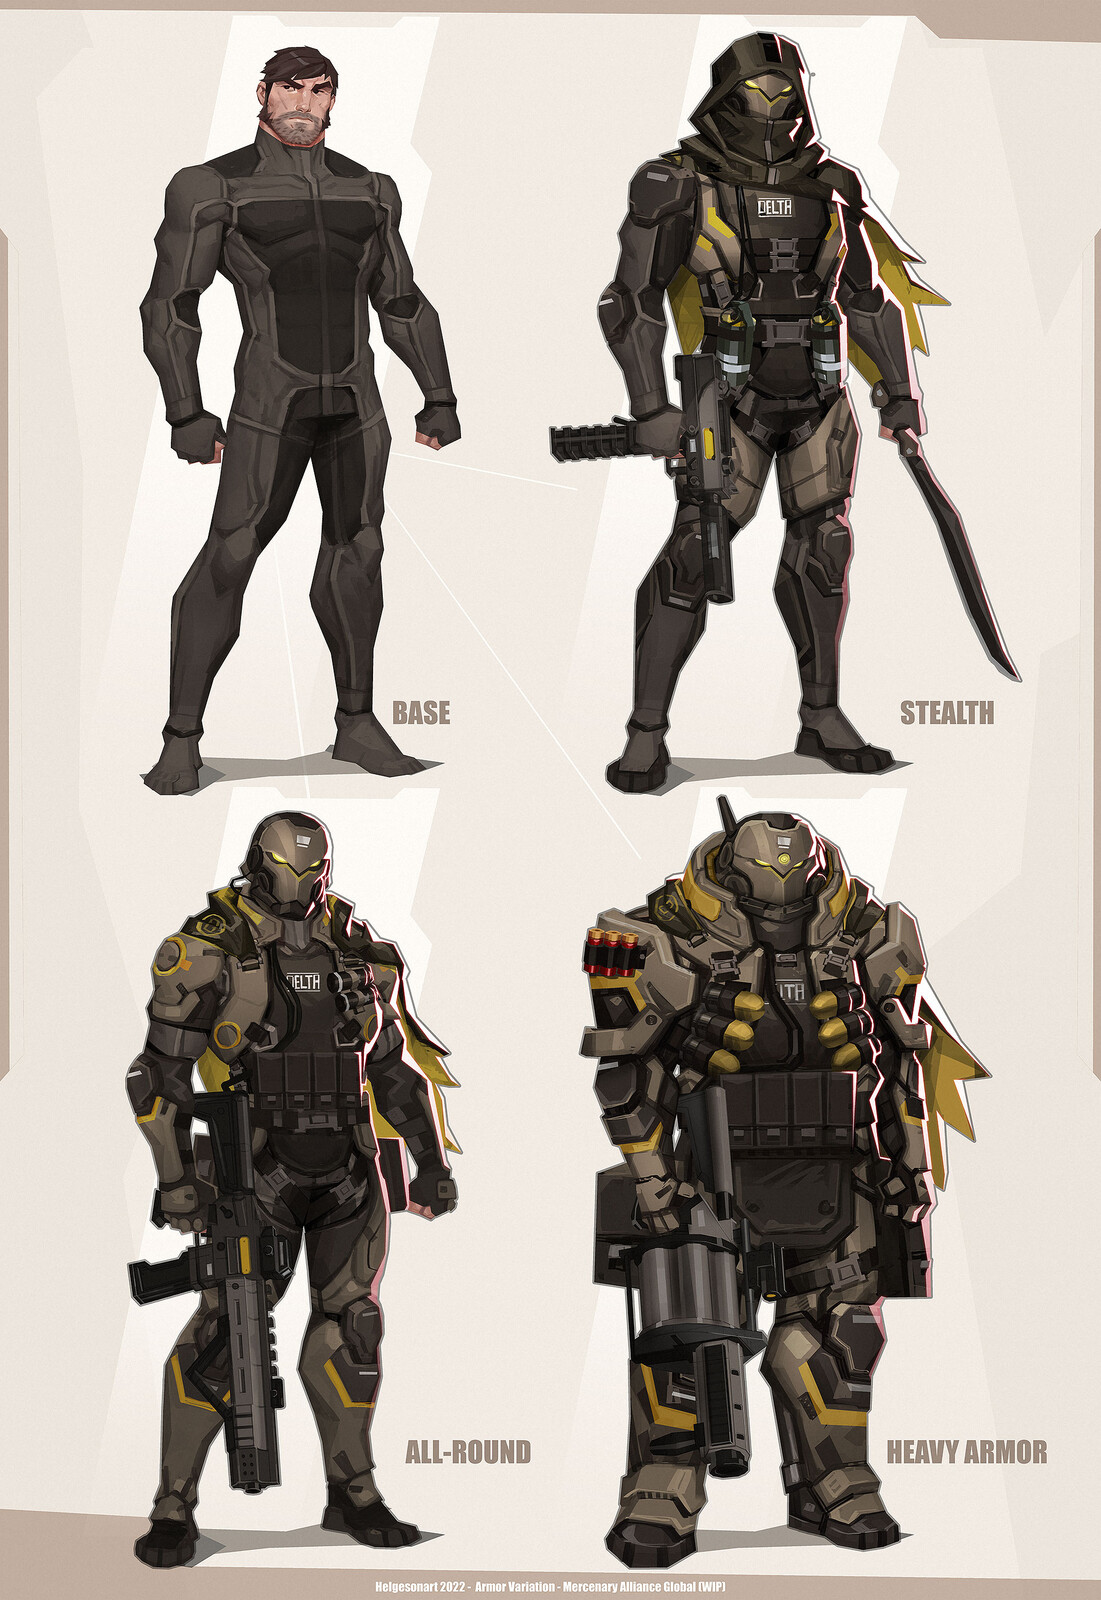 Different armor-types, for different gameplay functionality. 